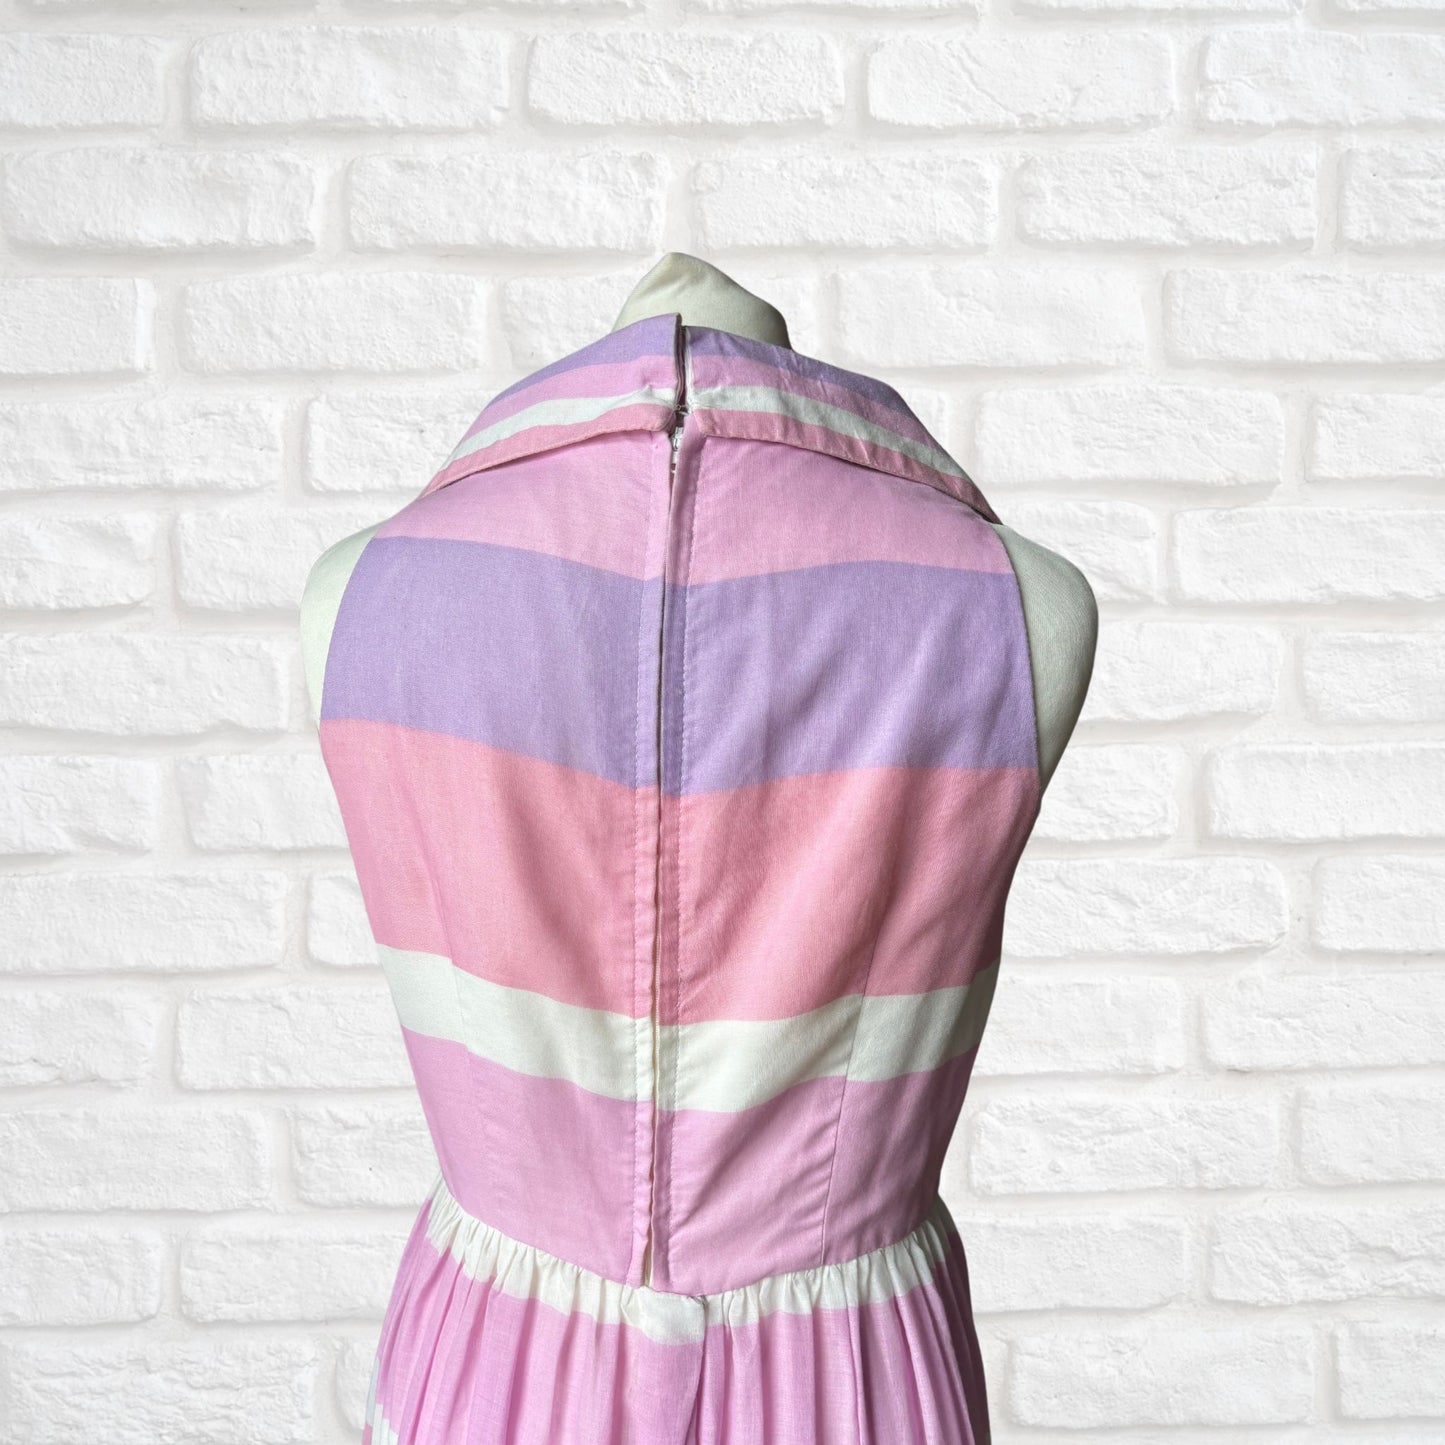 Stunning 70s Pink, Purple, and White Sleeveless Maxi Dress with Dagger Collar - Lisa Young, London . Approx UK size 8-10